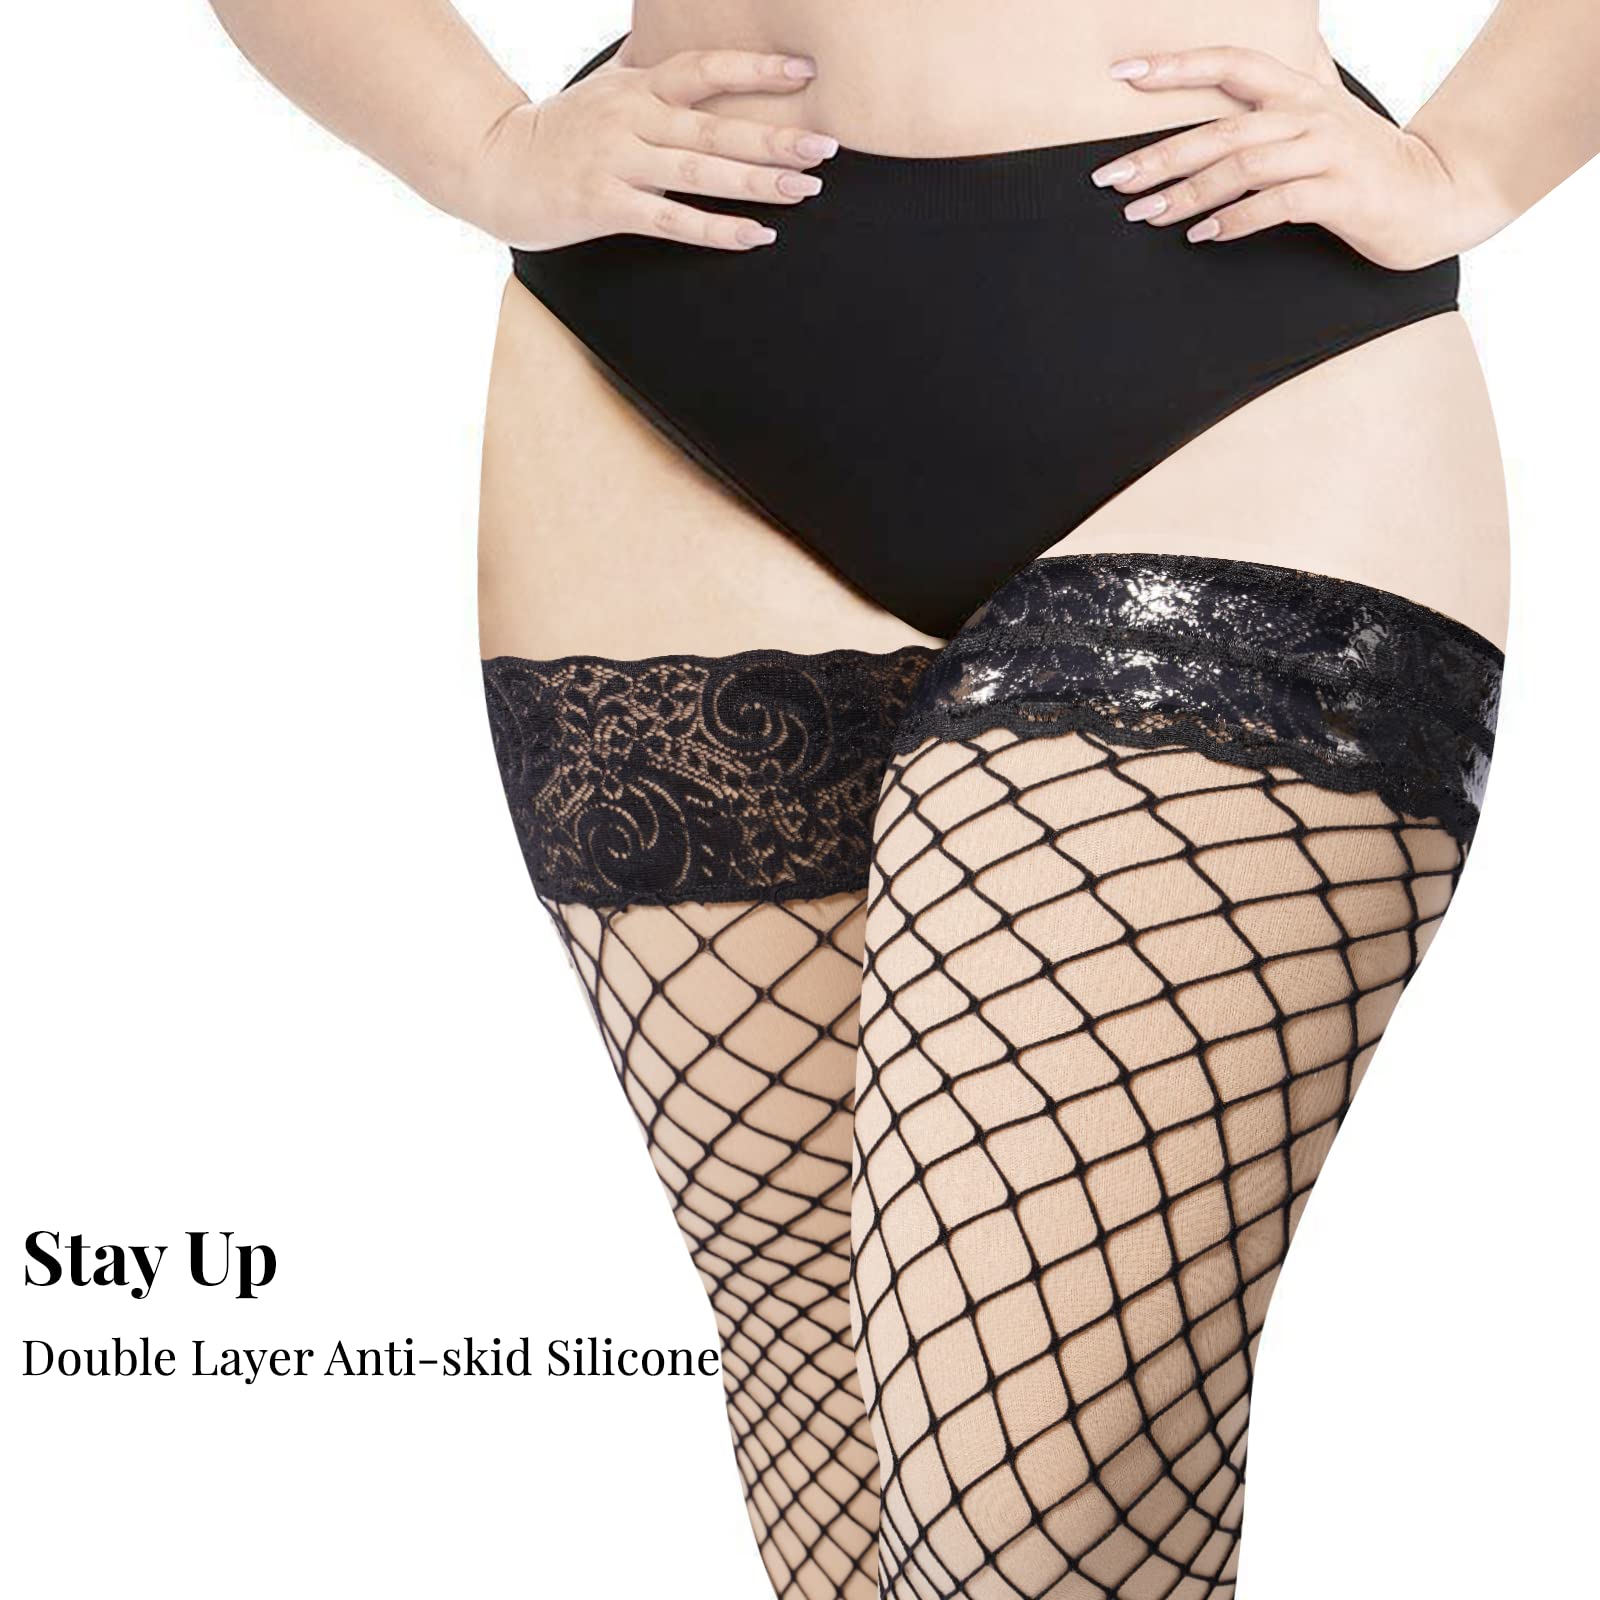 Plus Size Fishnet Stockings Sheer Silicone Lace - Moon Wood